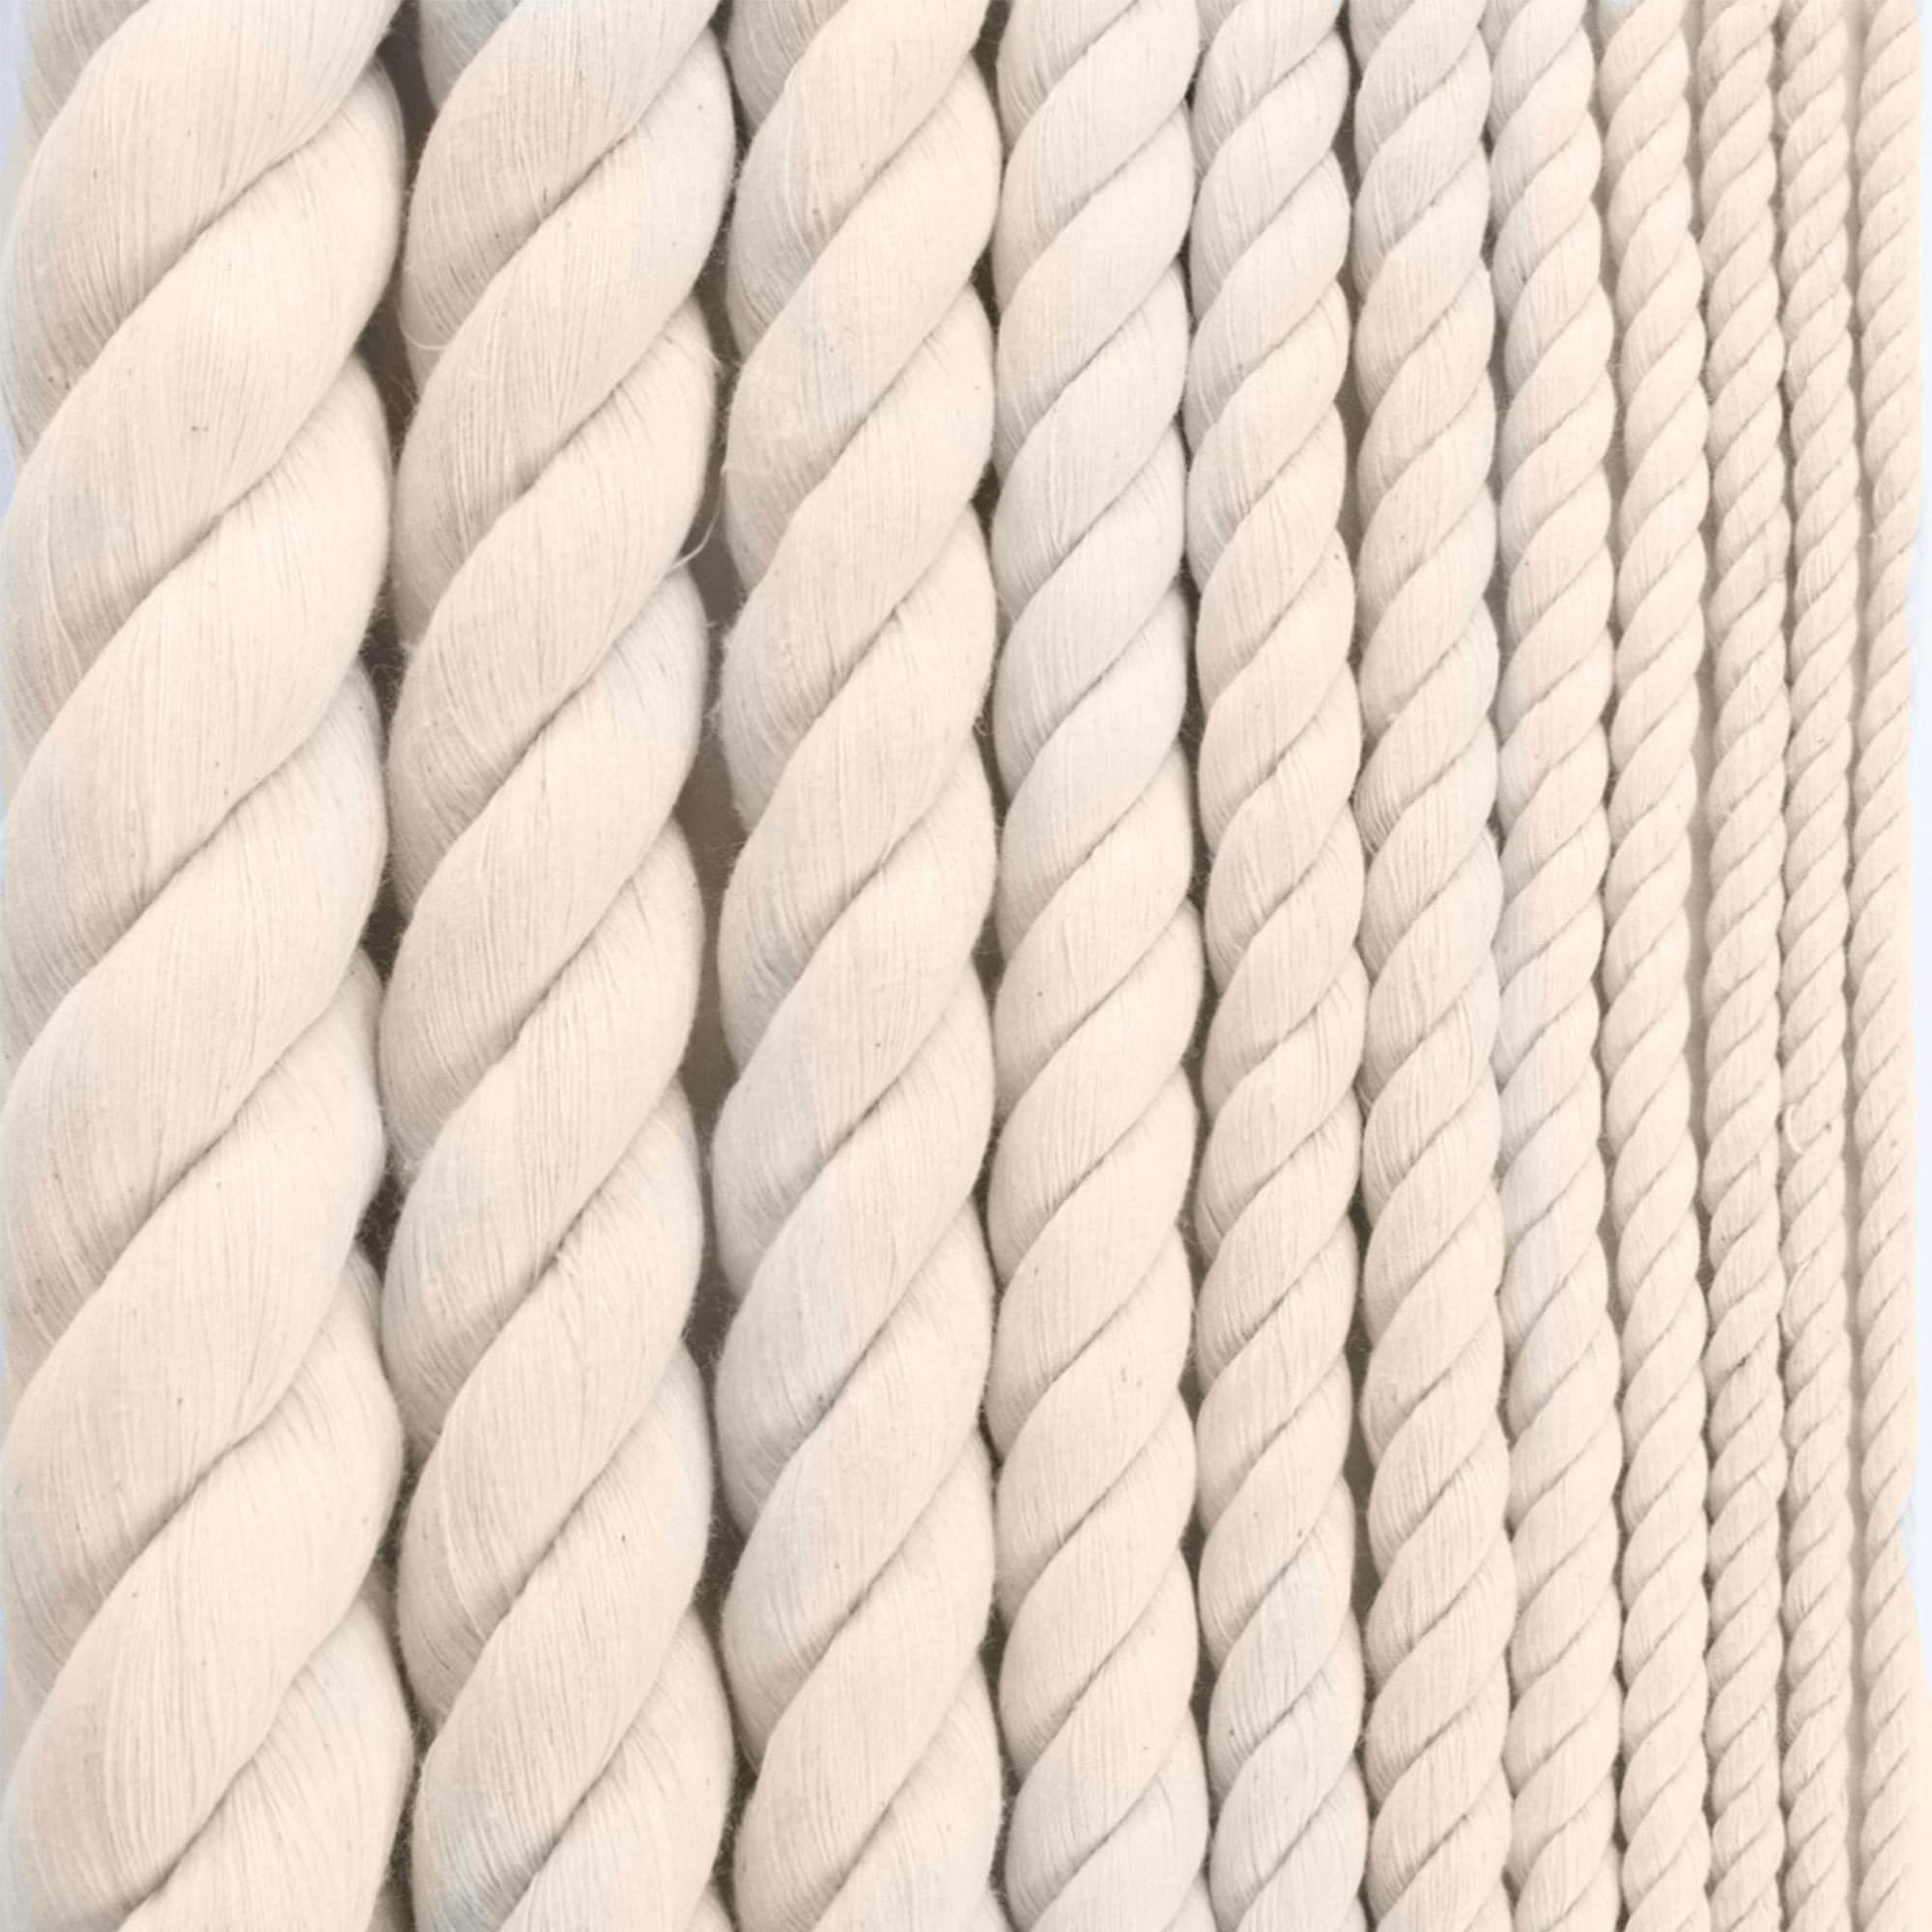 Macrame Cord Cotton Rope Macrame Supplies 3 Ply Twisted Macrame Rope S –  MudraCrafts